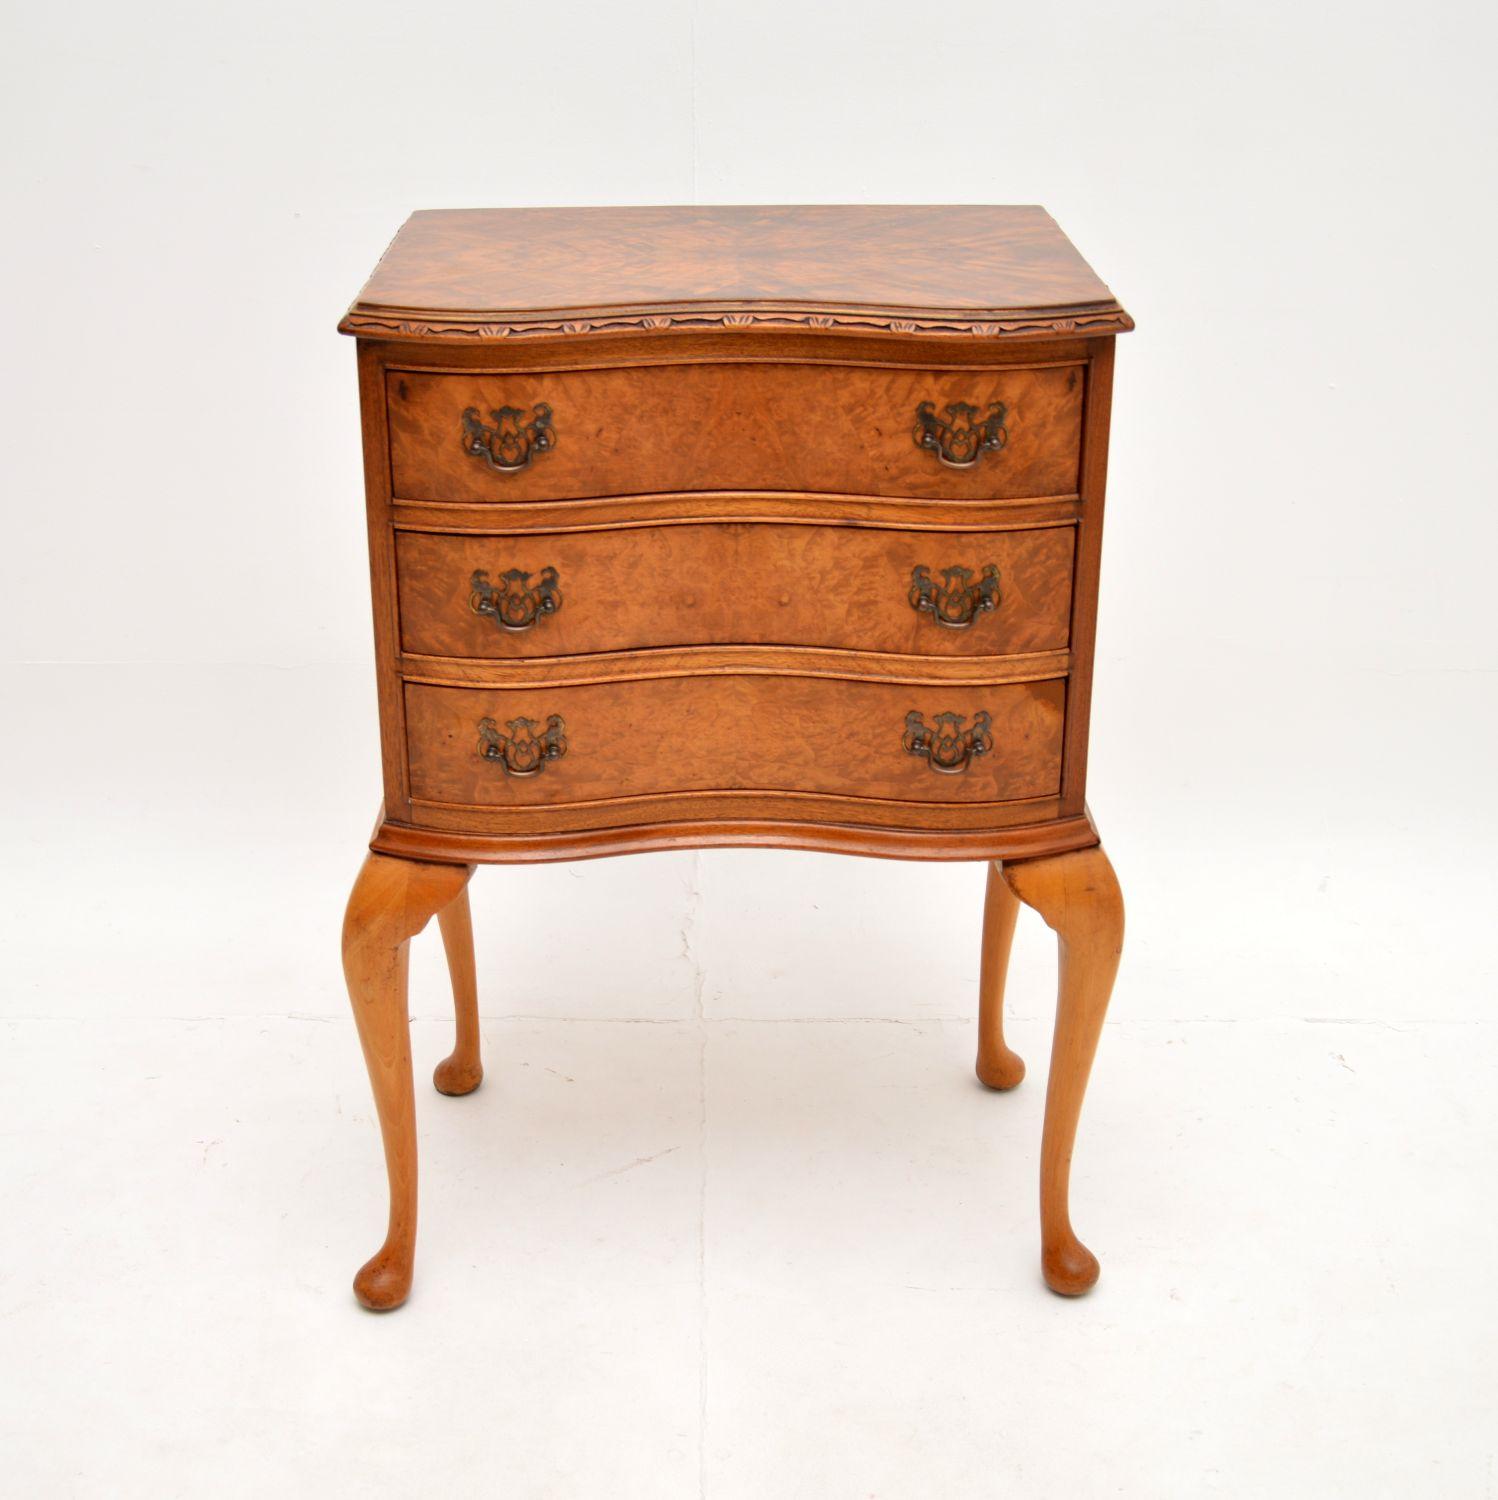 A beautiful antique burr walnut chest of drawers on legs. This is in the Queen Anne style, it was made in England and dates from around the 1930’s.

The quality is superb, this is elegant yet sturdy, with gorgeous burr walnut grain patterns. It has